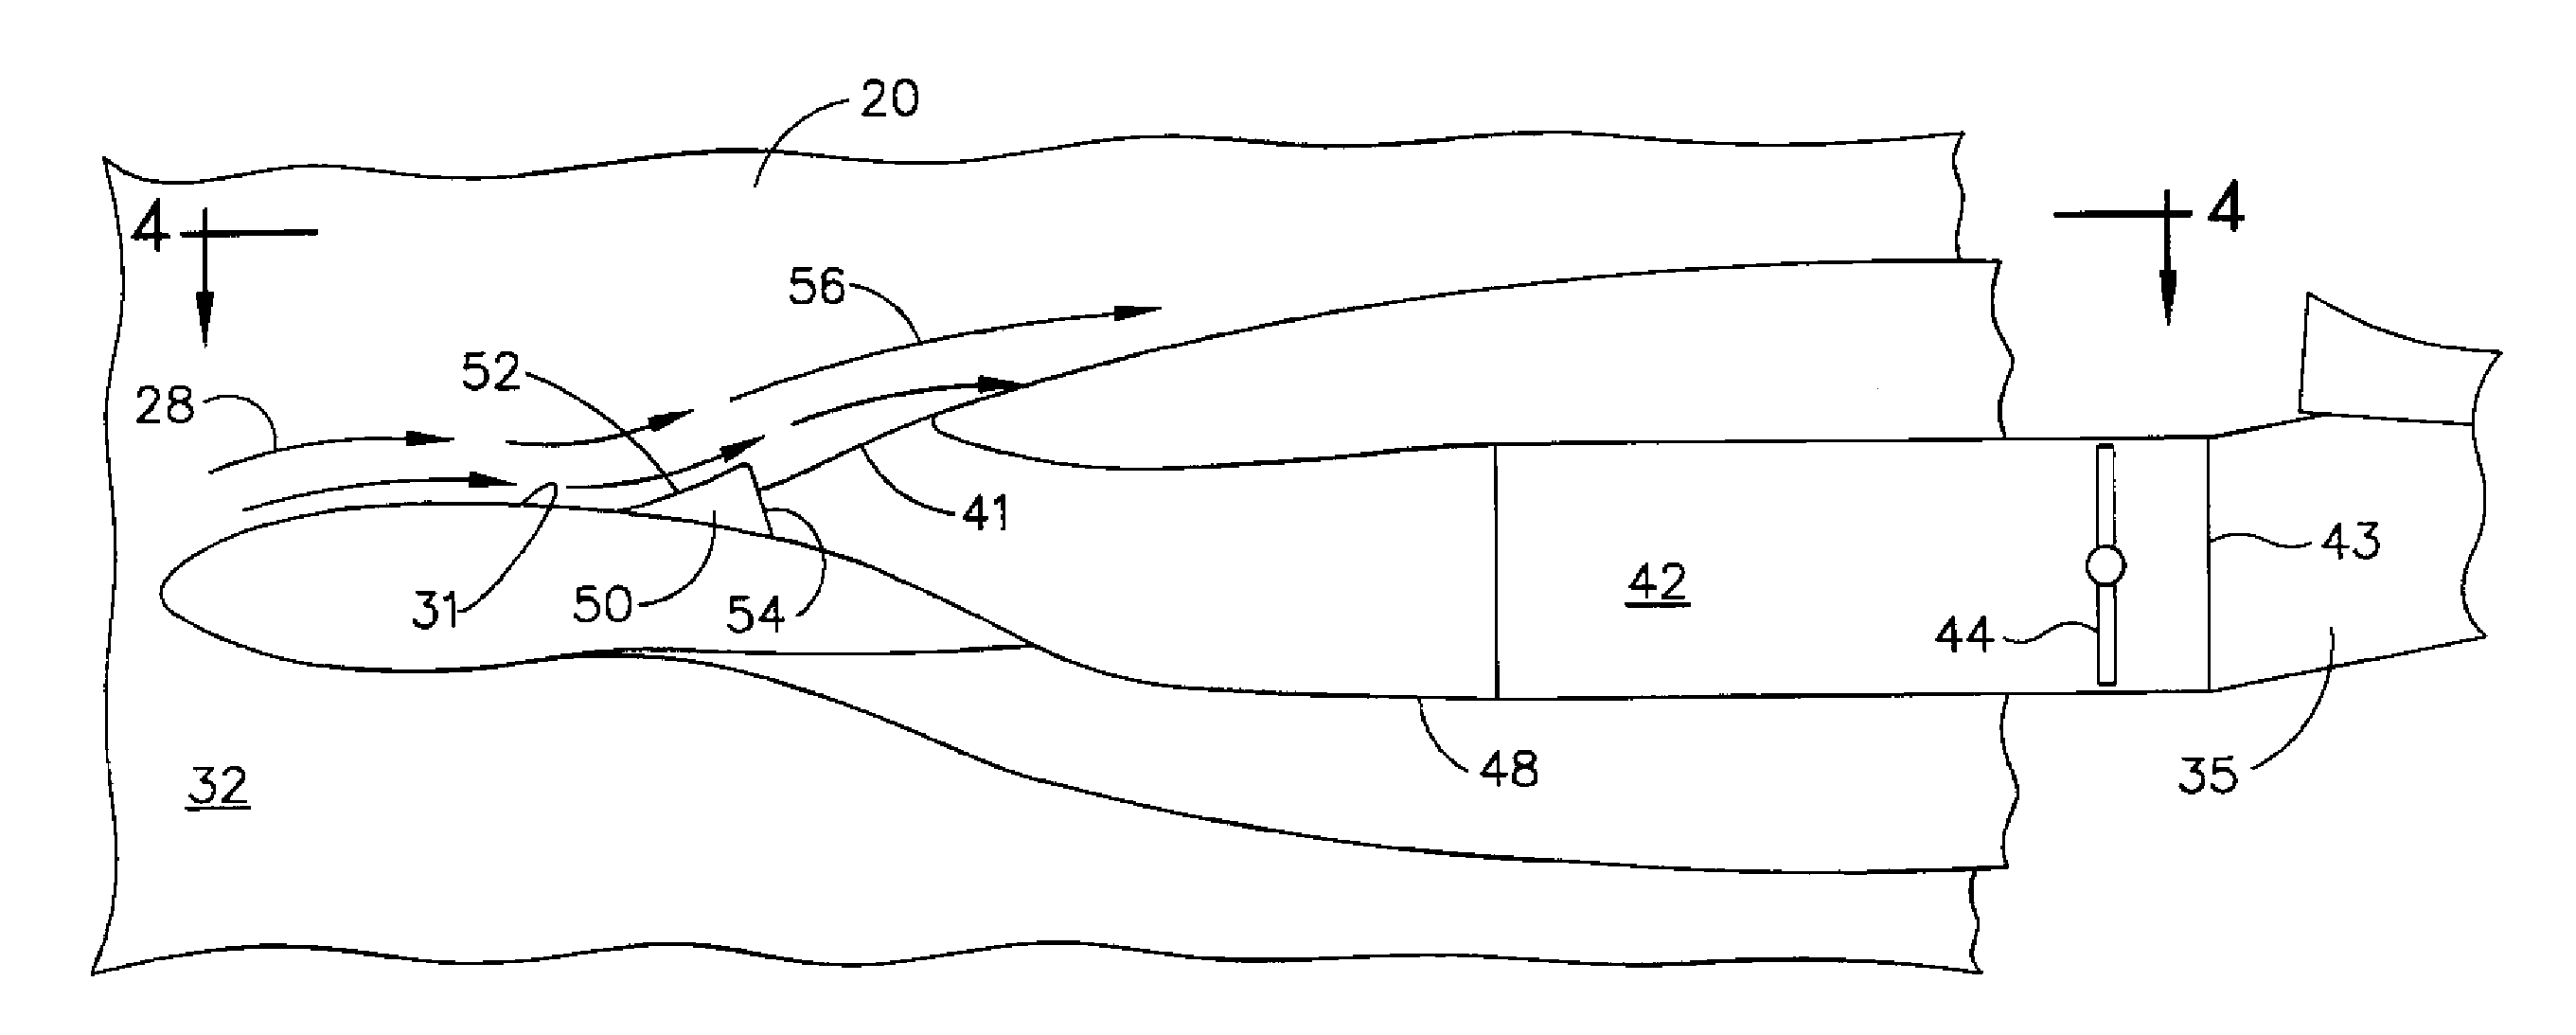 Apparatus and method for suppressing dynamic pressure instability in bleed duct